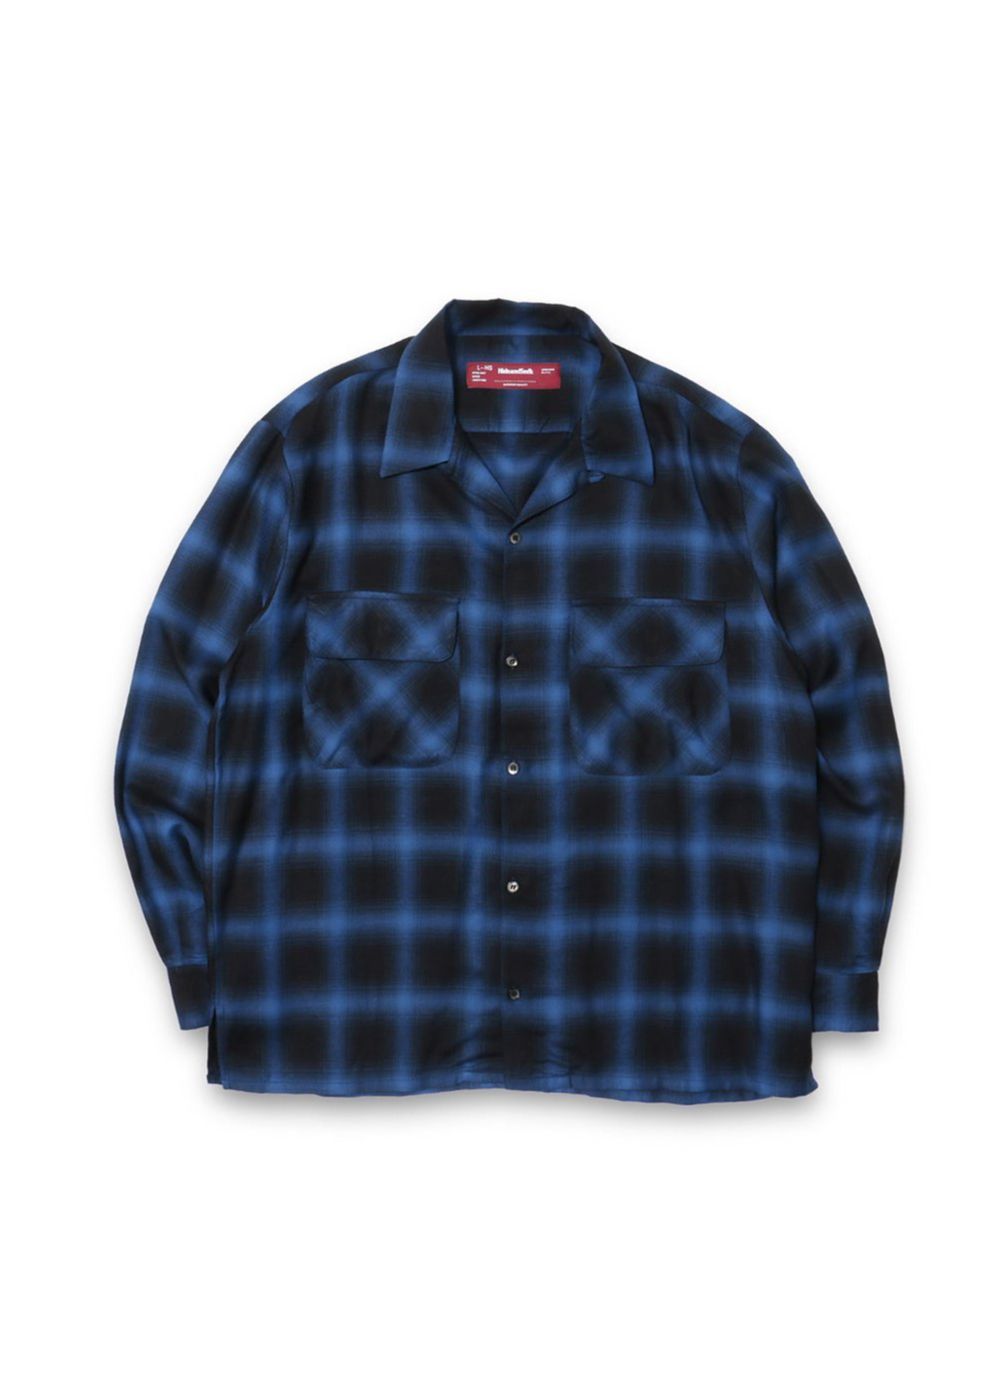 HIDE AND SEEK - OMBRE CHECK L/S SHIRT (BLUE) / オンブレチェック ...